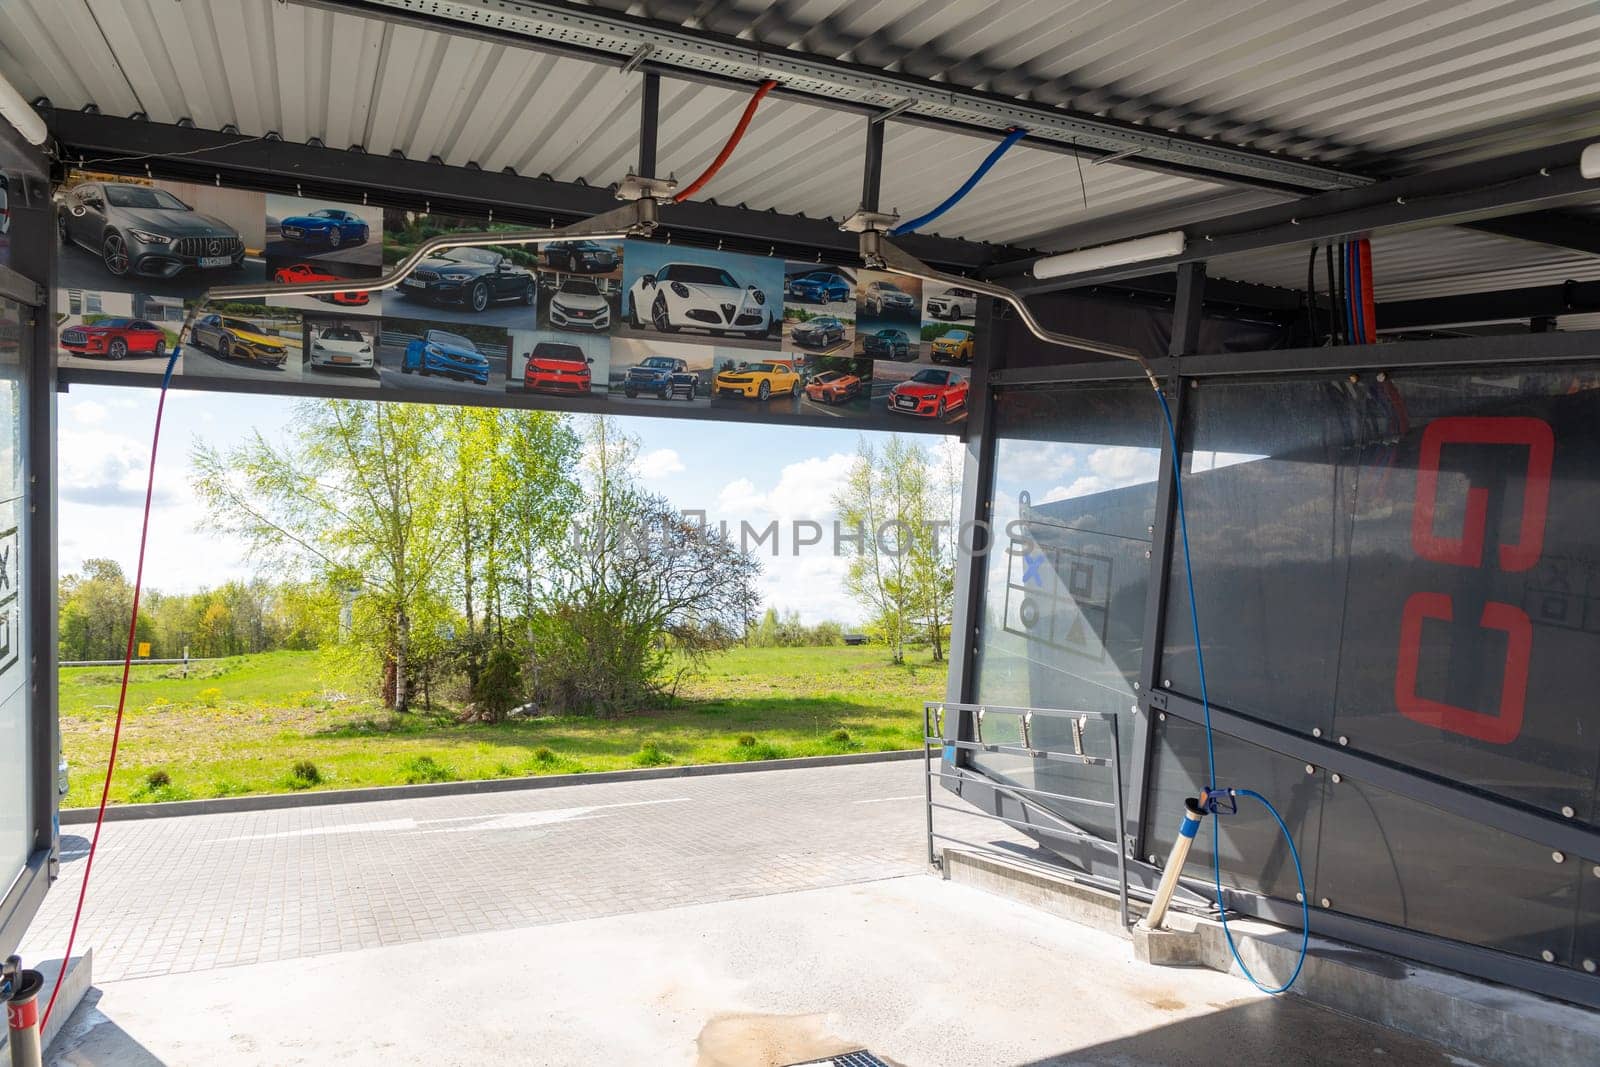 Grodno, Belarus - 28 April, 2023: The interior of the contactless self-service car wash Go by BY-_-BY